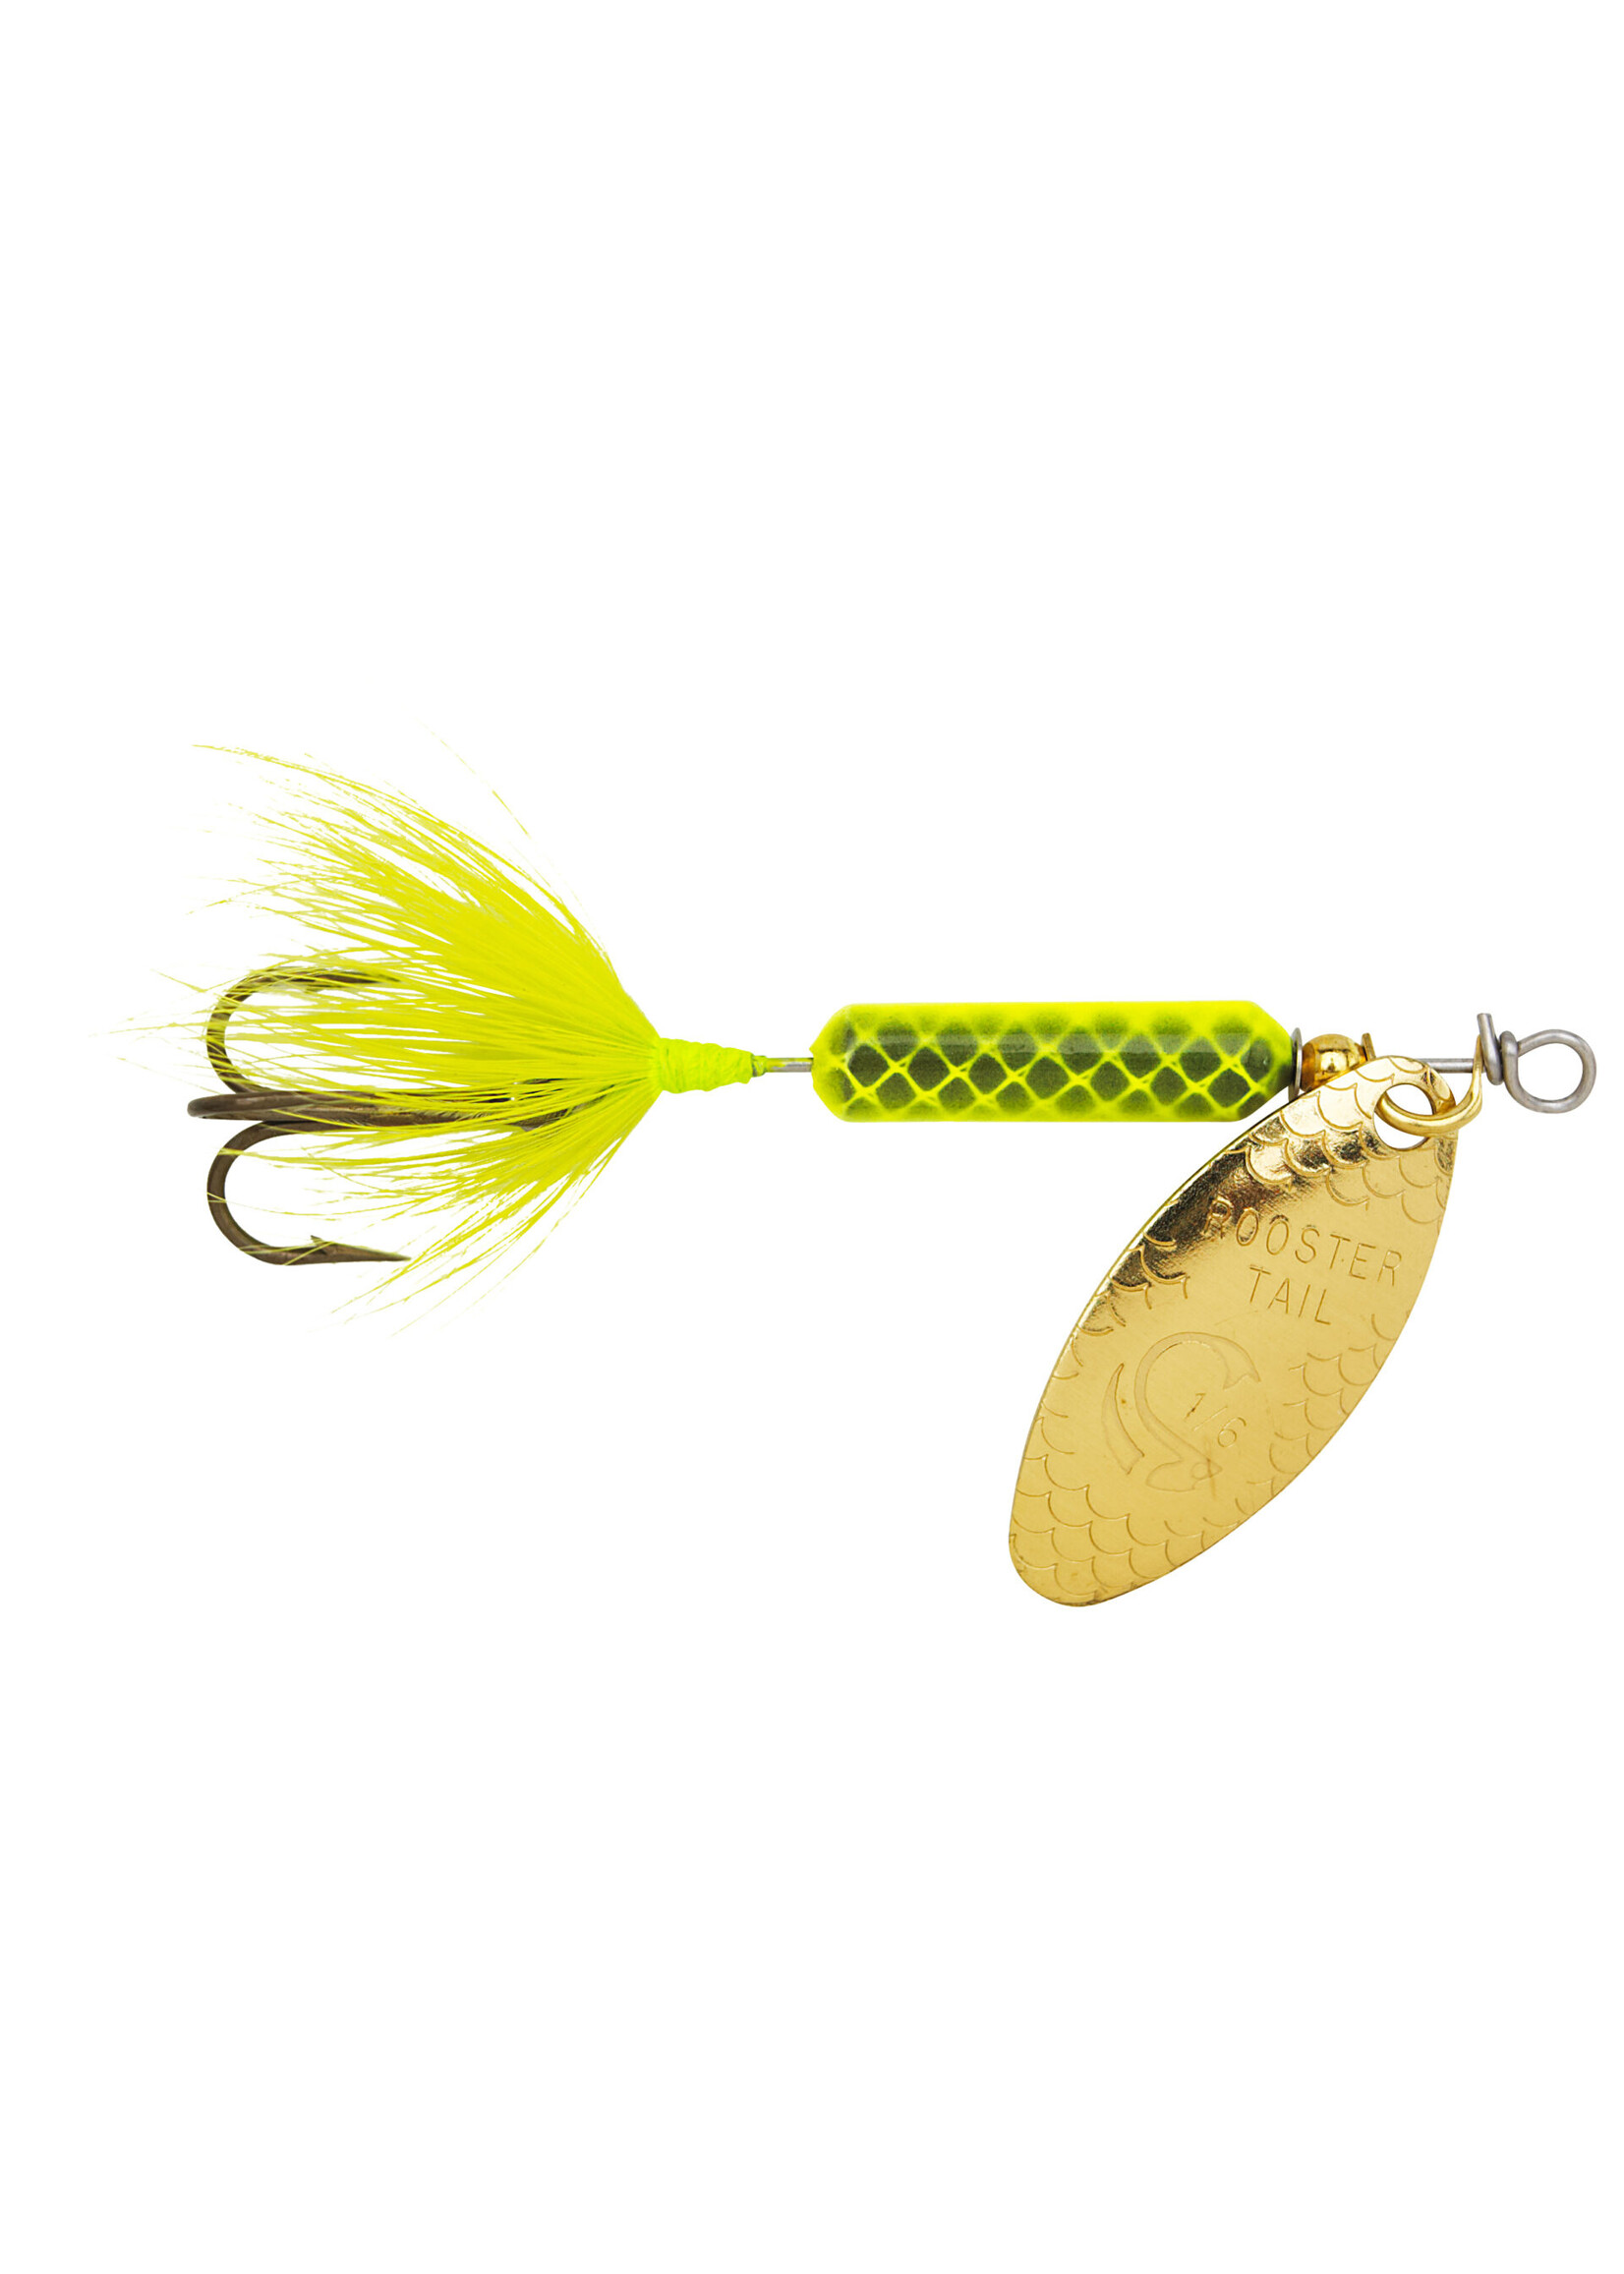 Rooster Tail Spinner 1/24 oz. - Tackle Shack